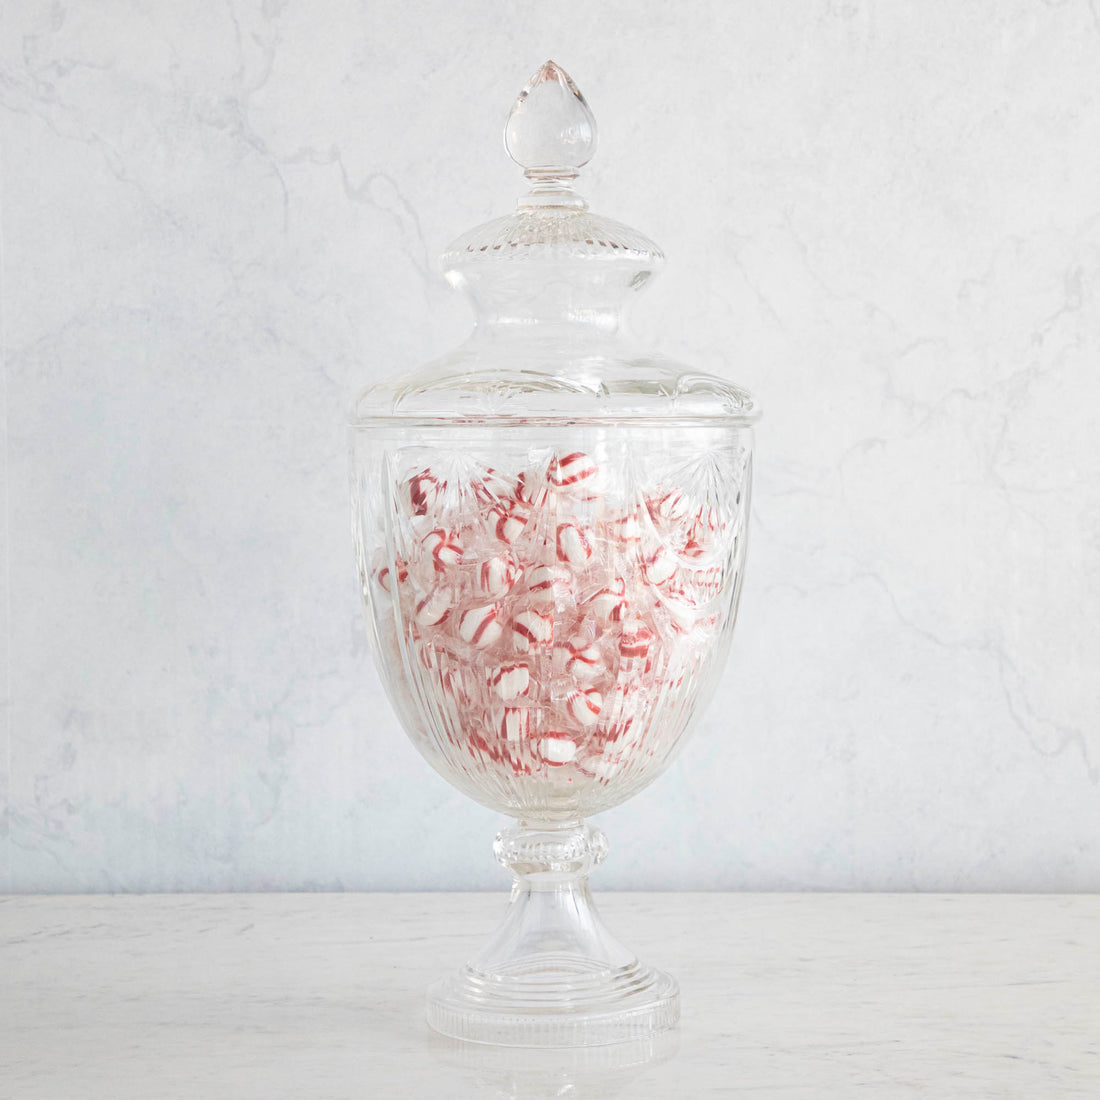 An elegant Shi Shi Glass Bonbonniere Vase filled with red and white candy canes on a marble background, showcasing its timeless design as a standout piece of home decor.